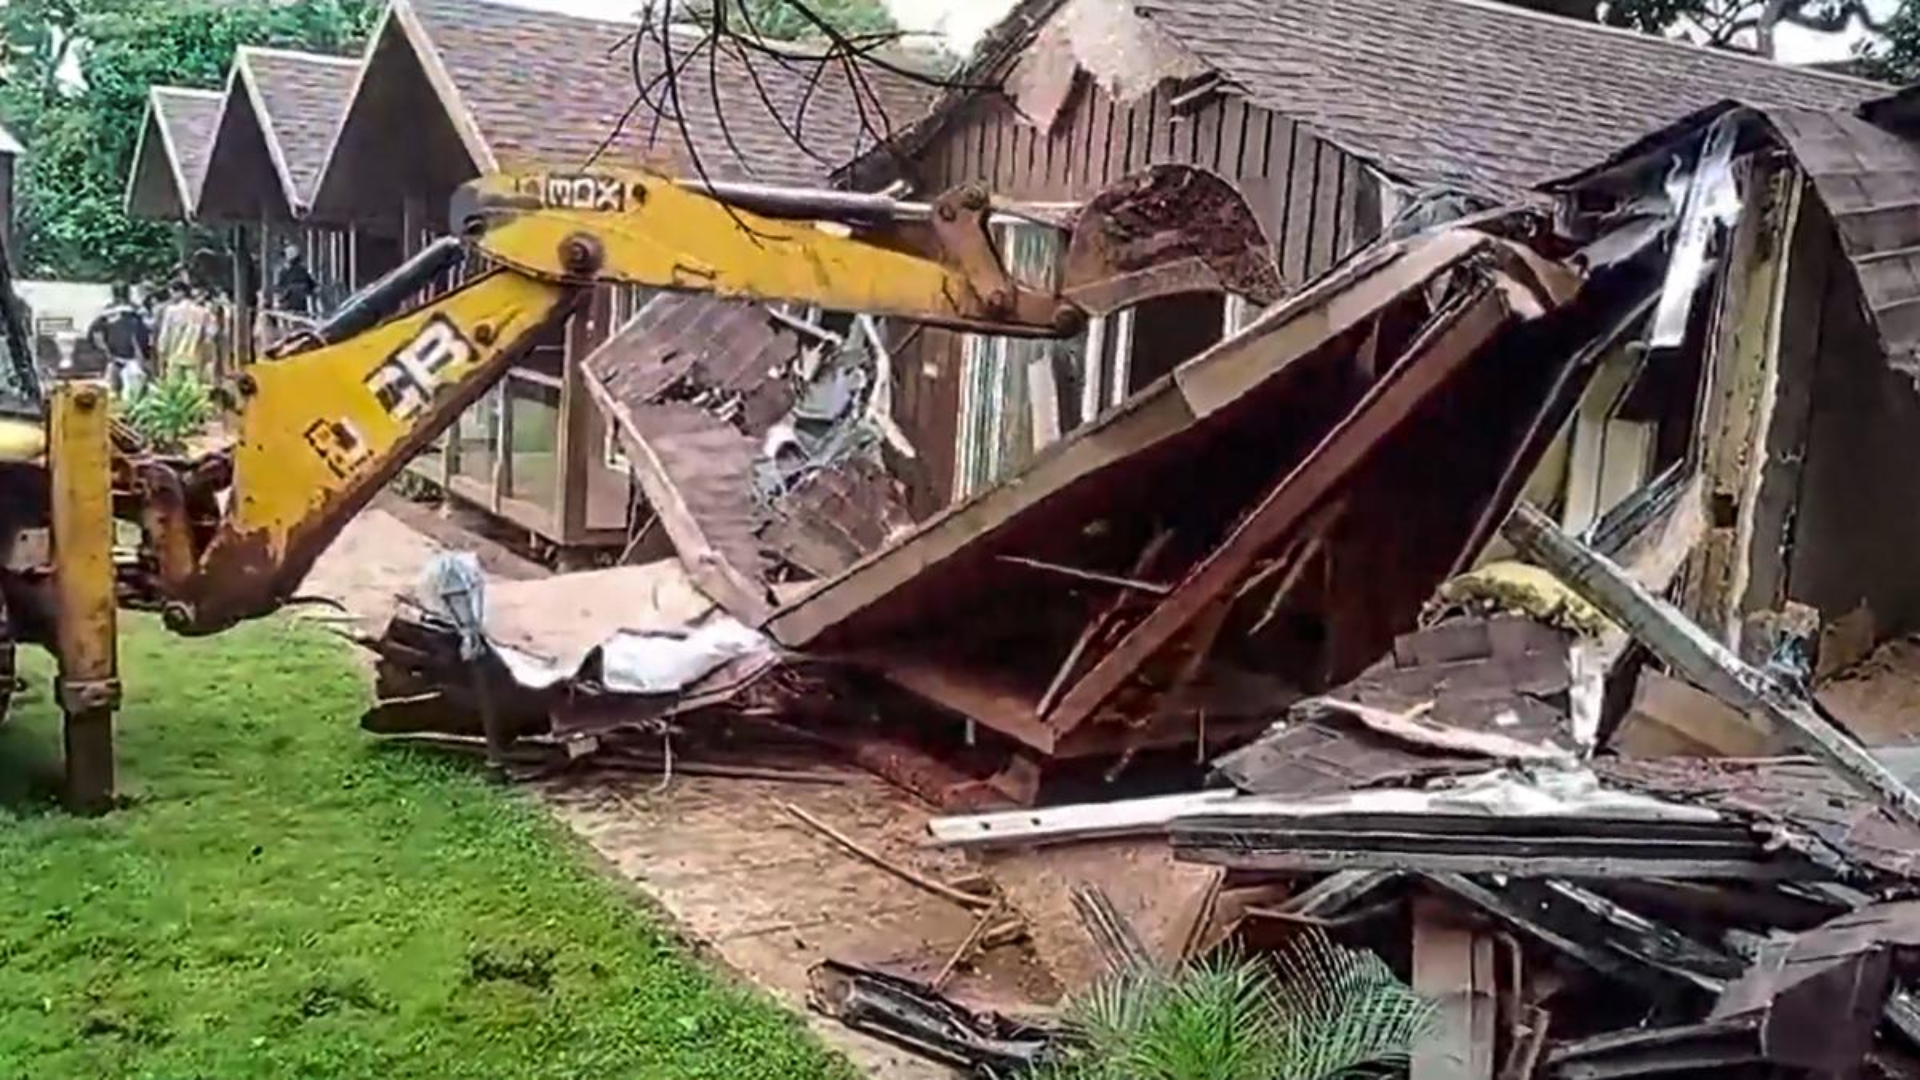 Pune Porsche Crash: Illegal Portions Of Resort Owned By Minor’s Family Demolished In Mahabaleshwar